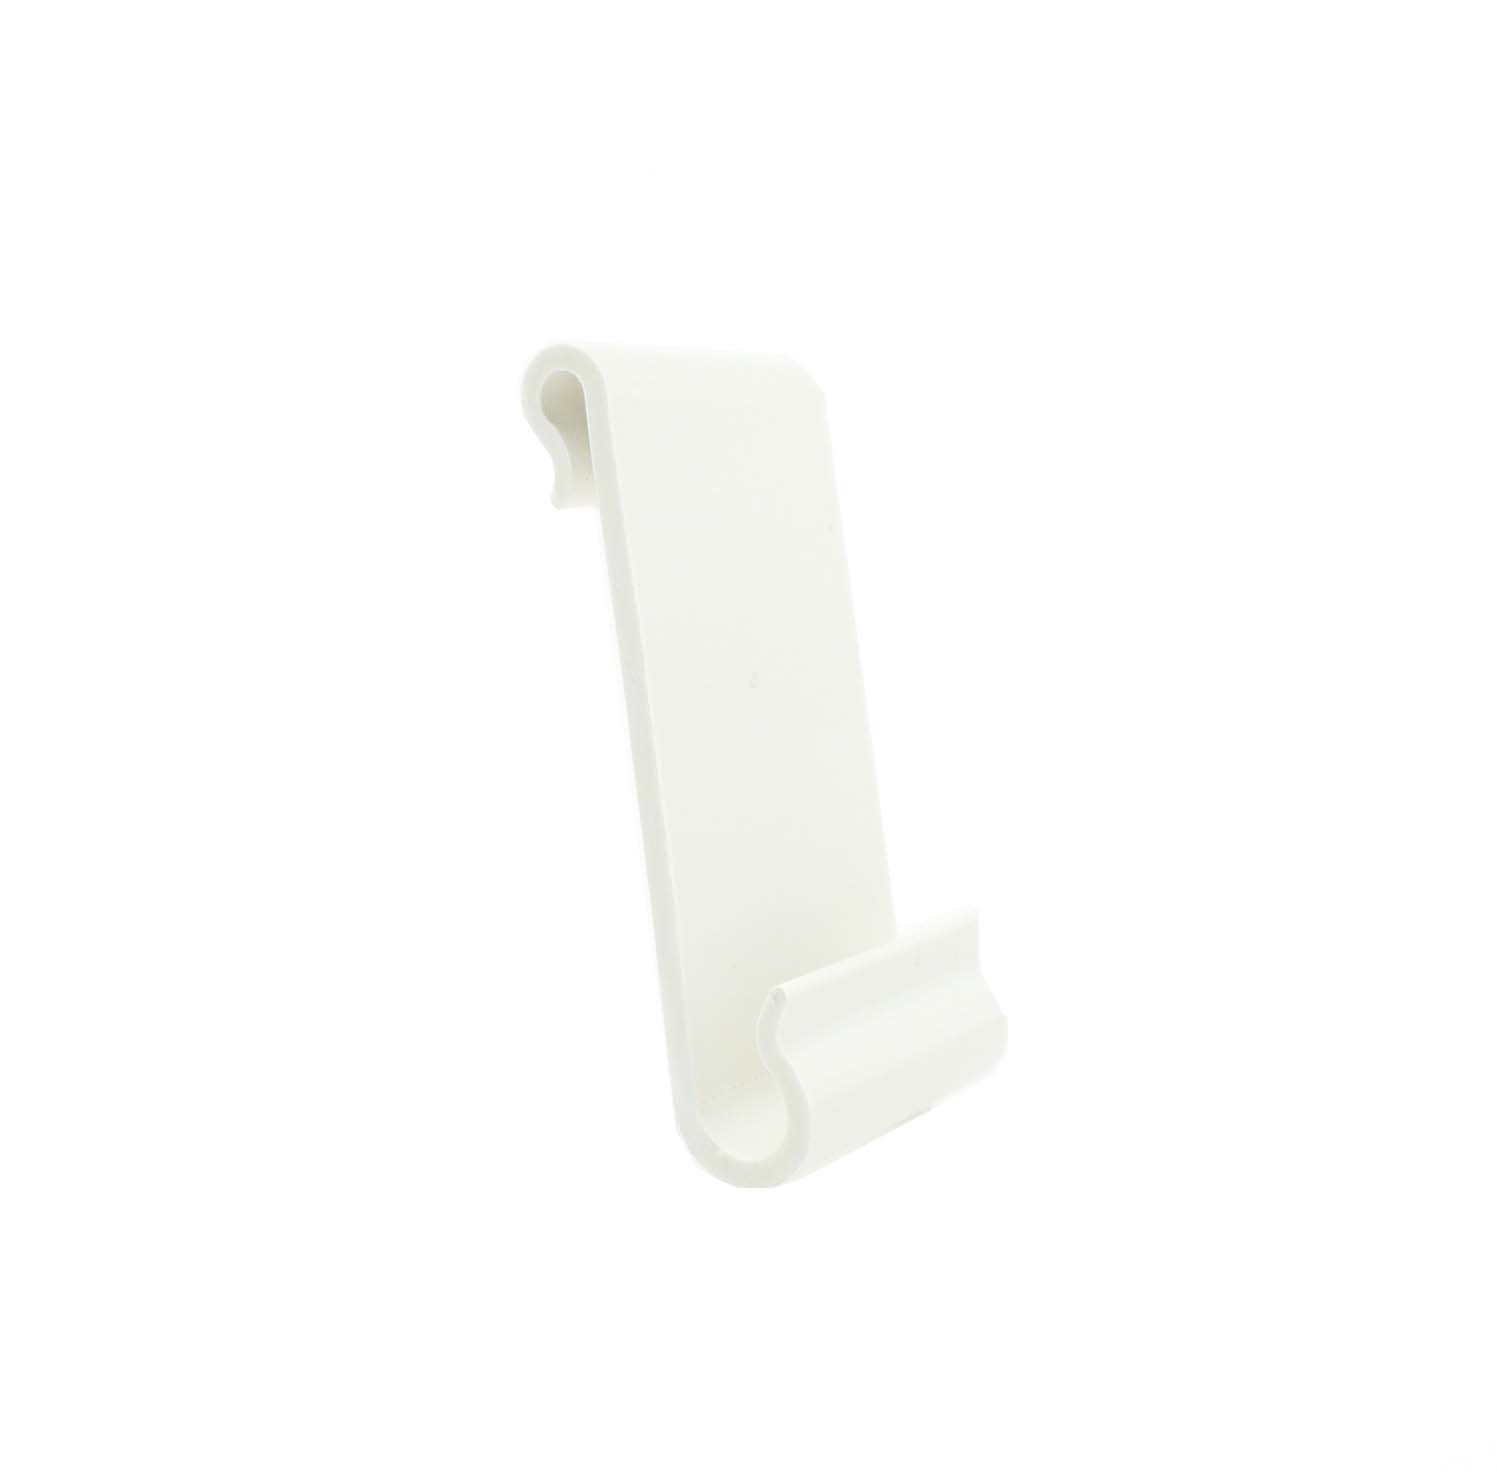 WC-1 POWER WING CLIP, WHITE PLASTIC